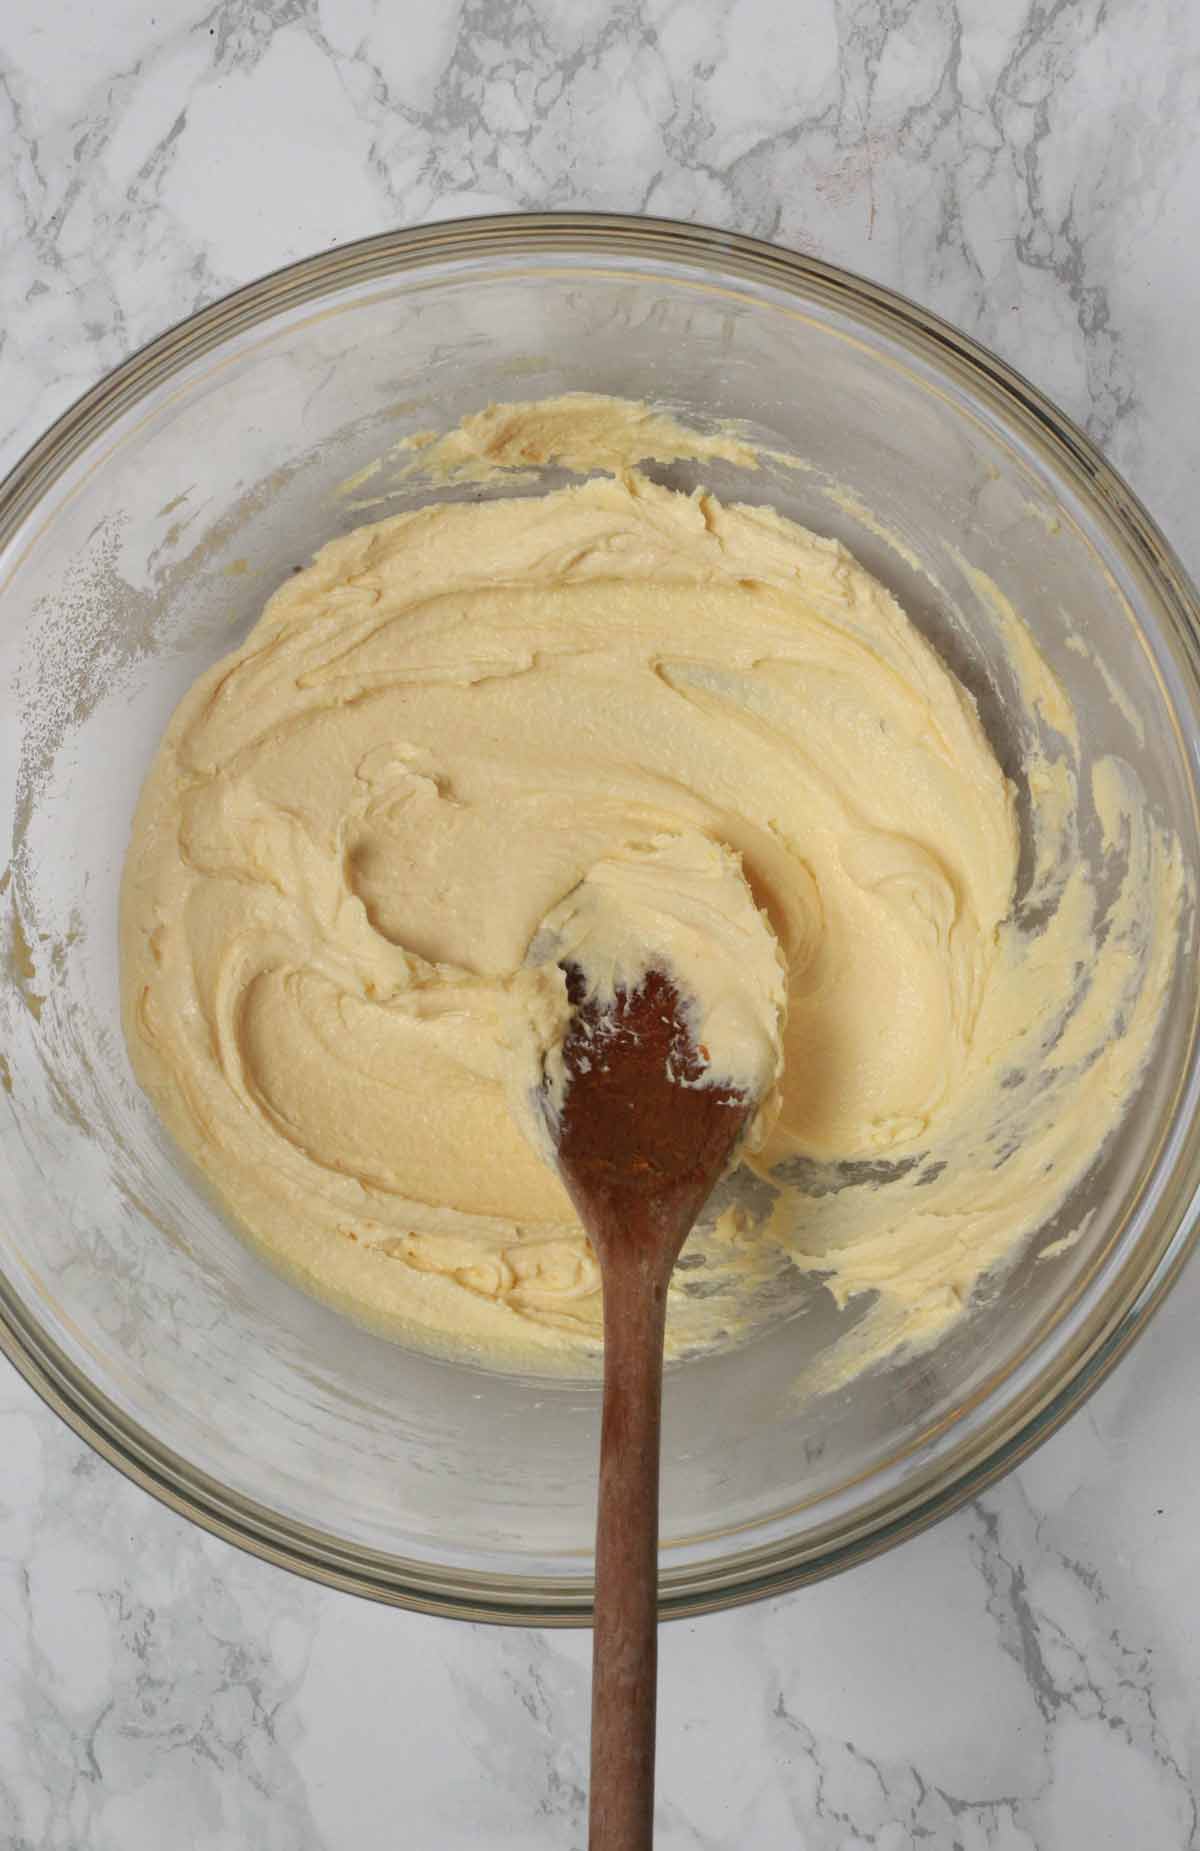 Margarine And Sugar Creamed In A Bowl